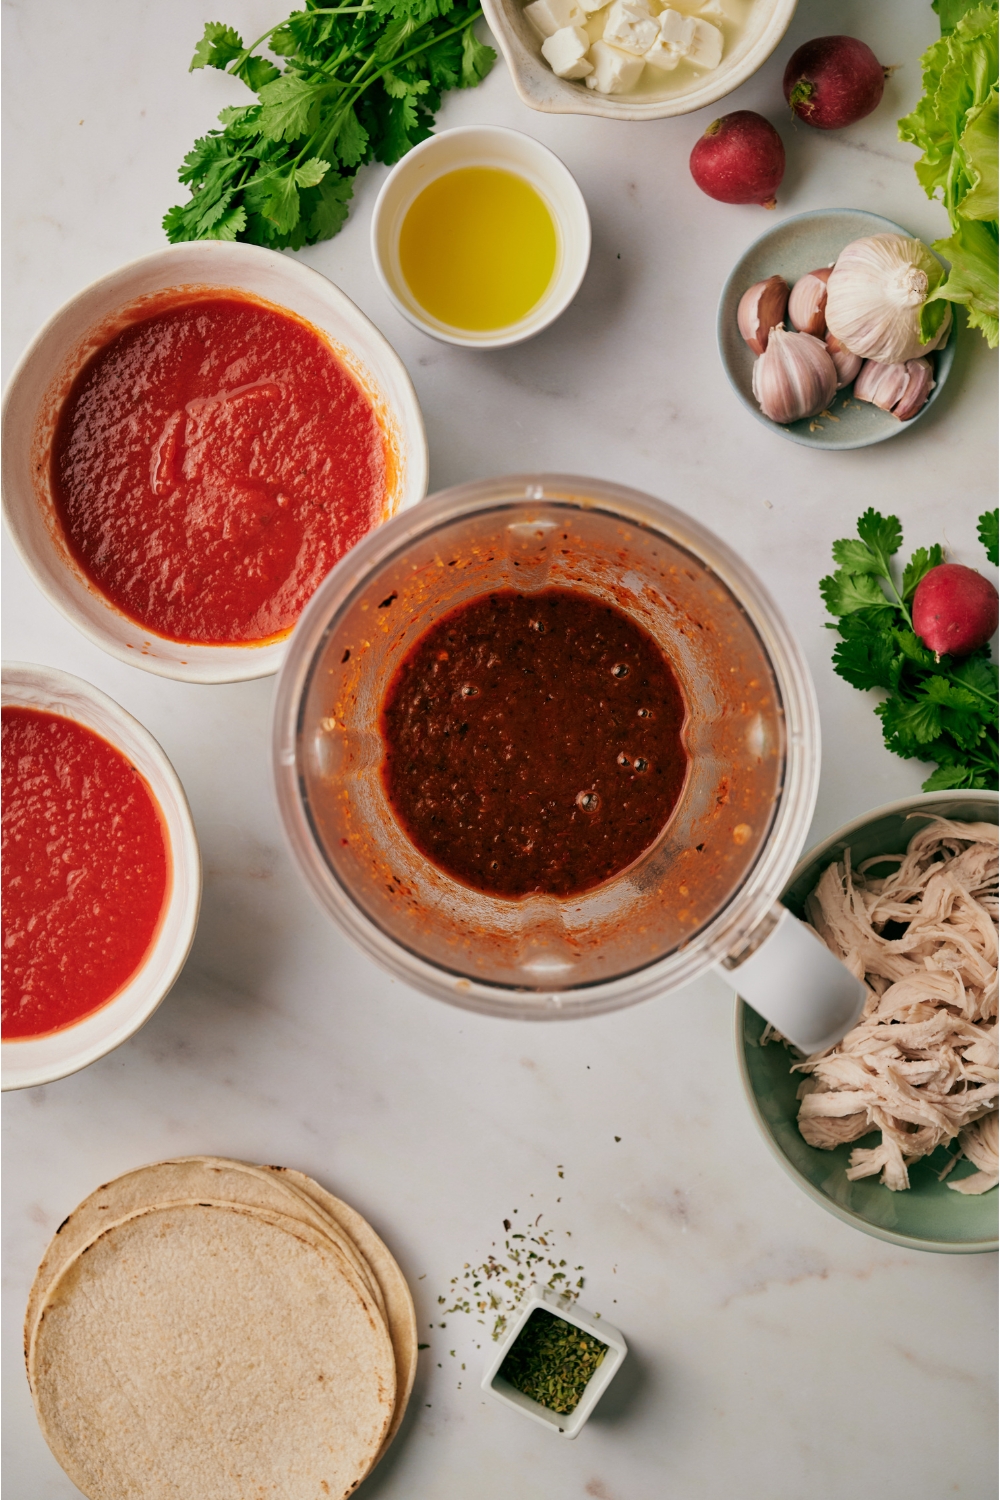 A blender filled with a chili sauce mixture surrounded by an assortment of ingredients including bowls of tomato sauce, shredded chicken, garlic cloves, and a stack of tortillas.